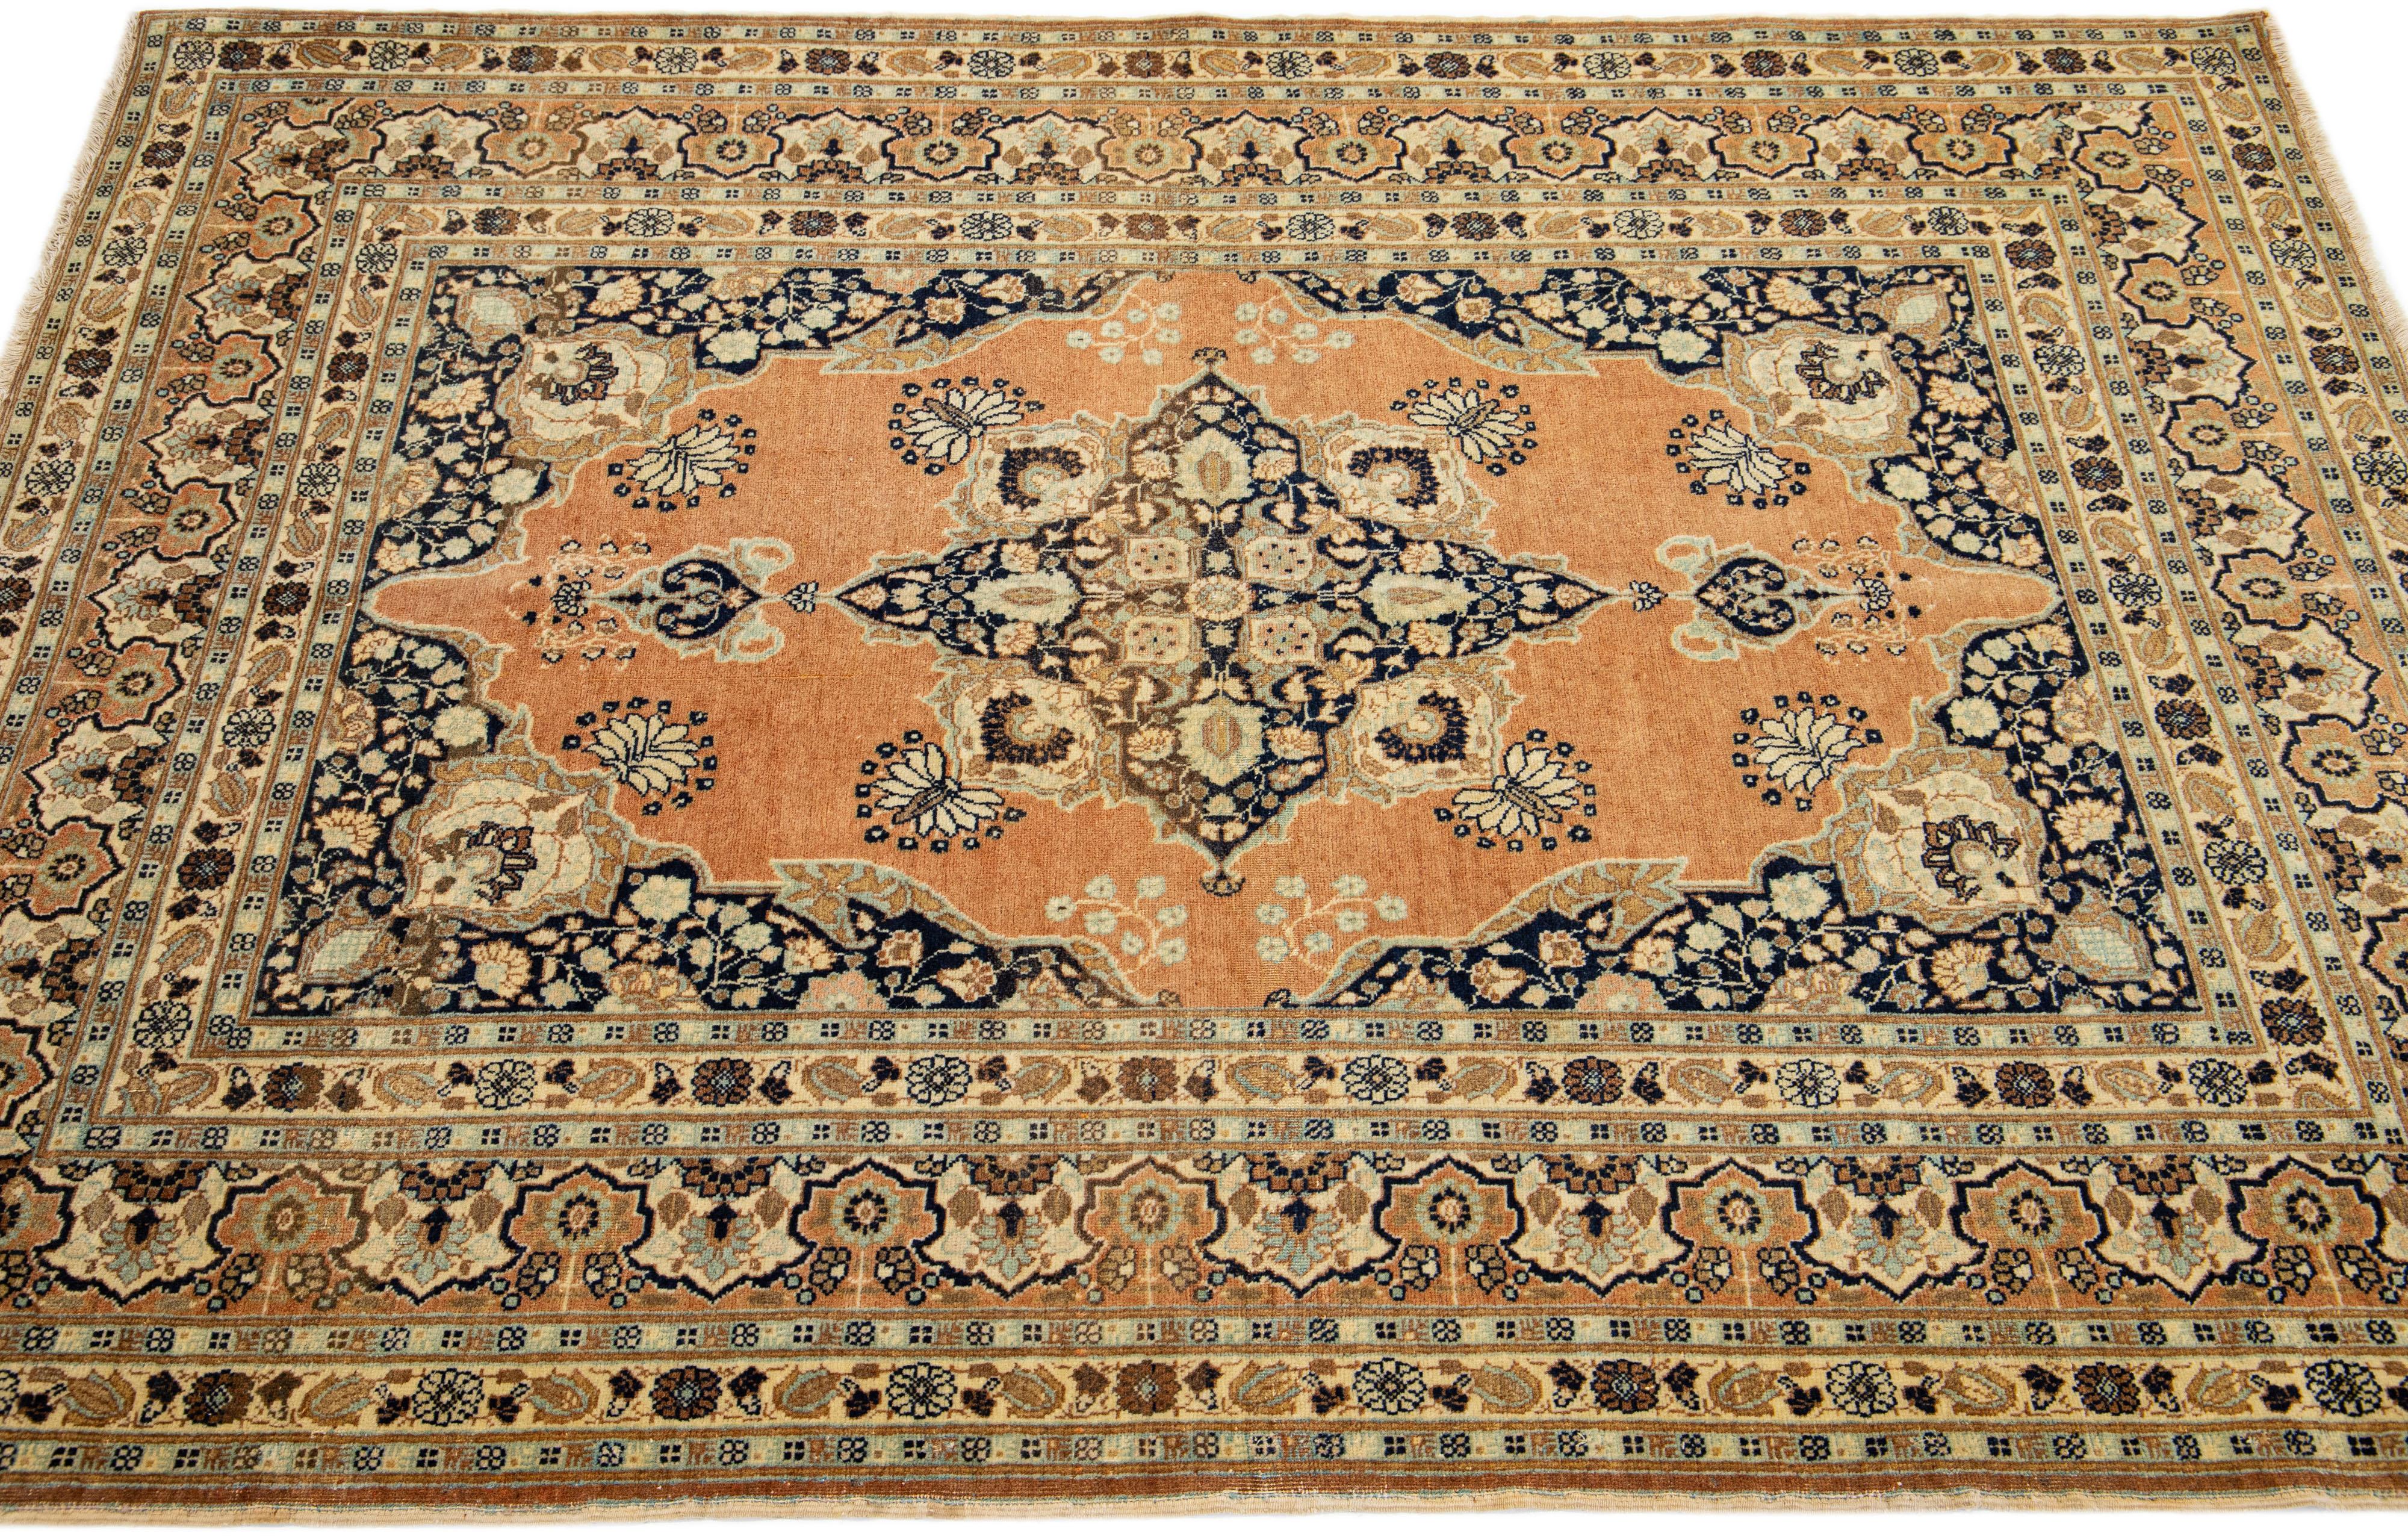 Antique Handmade Persian Tabriz Scatter Wool Rug with Allover Motif In Good Condition For Sale In Norwalk, CT